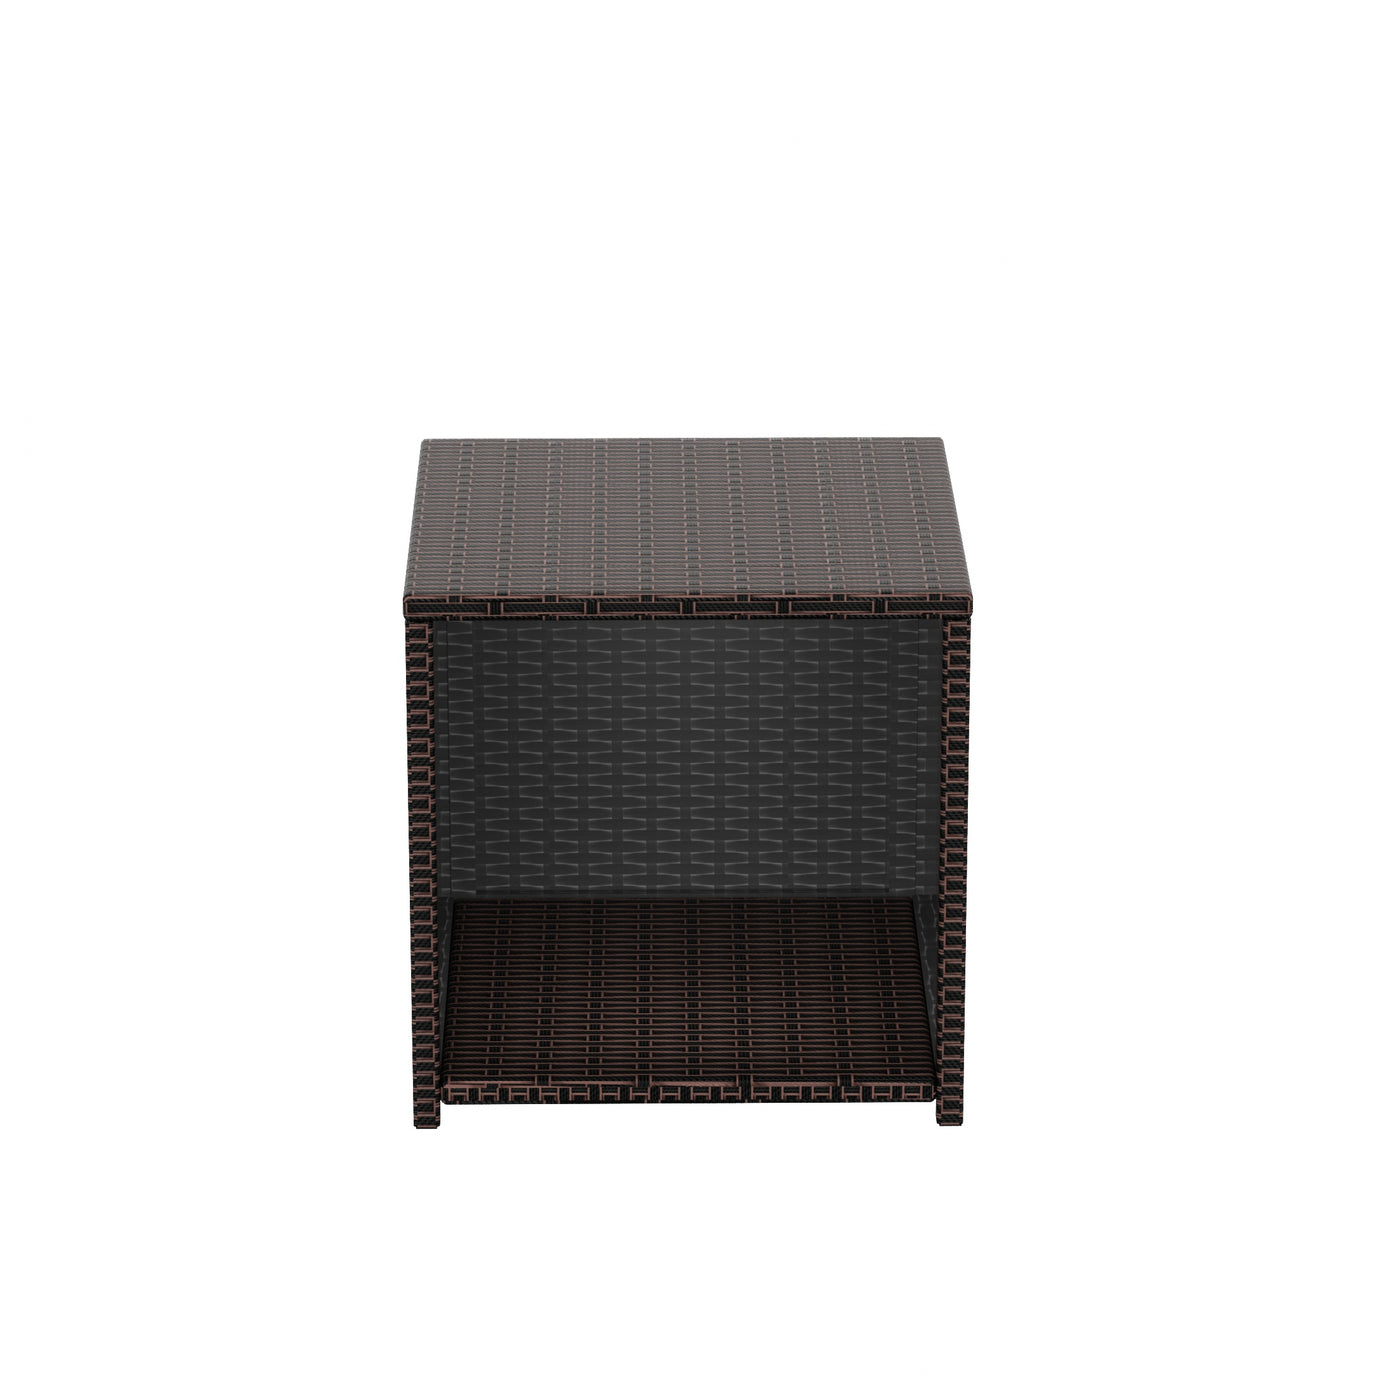 Coastal 2-Piece Wicker Outdoor Storage Ottoman and Square Side Table Set